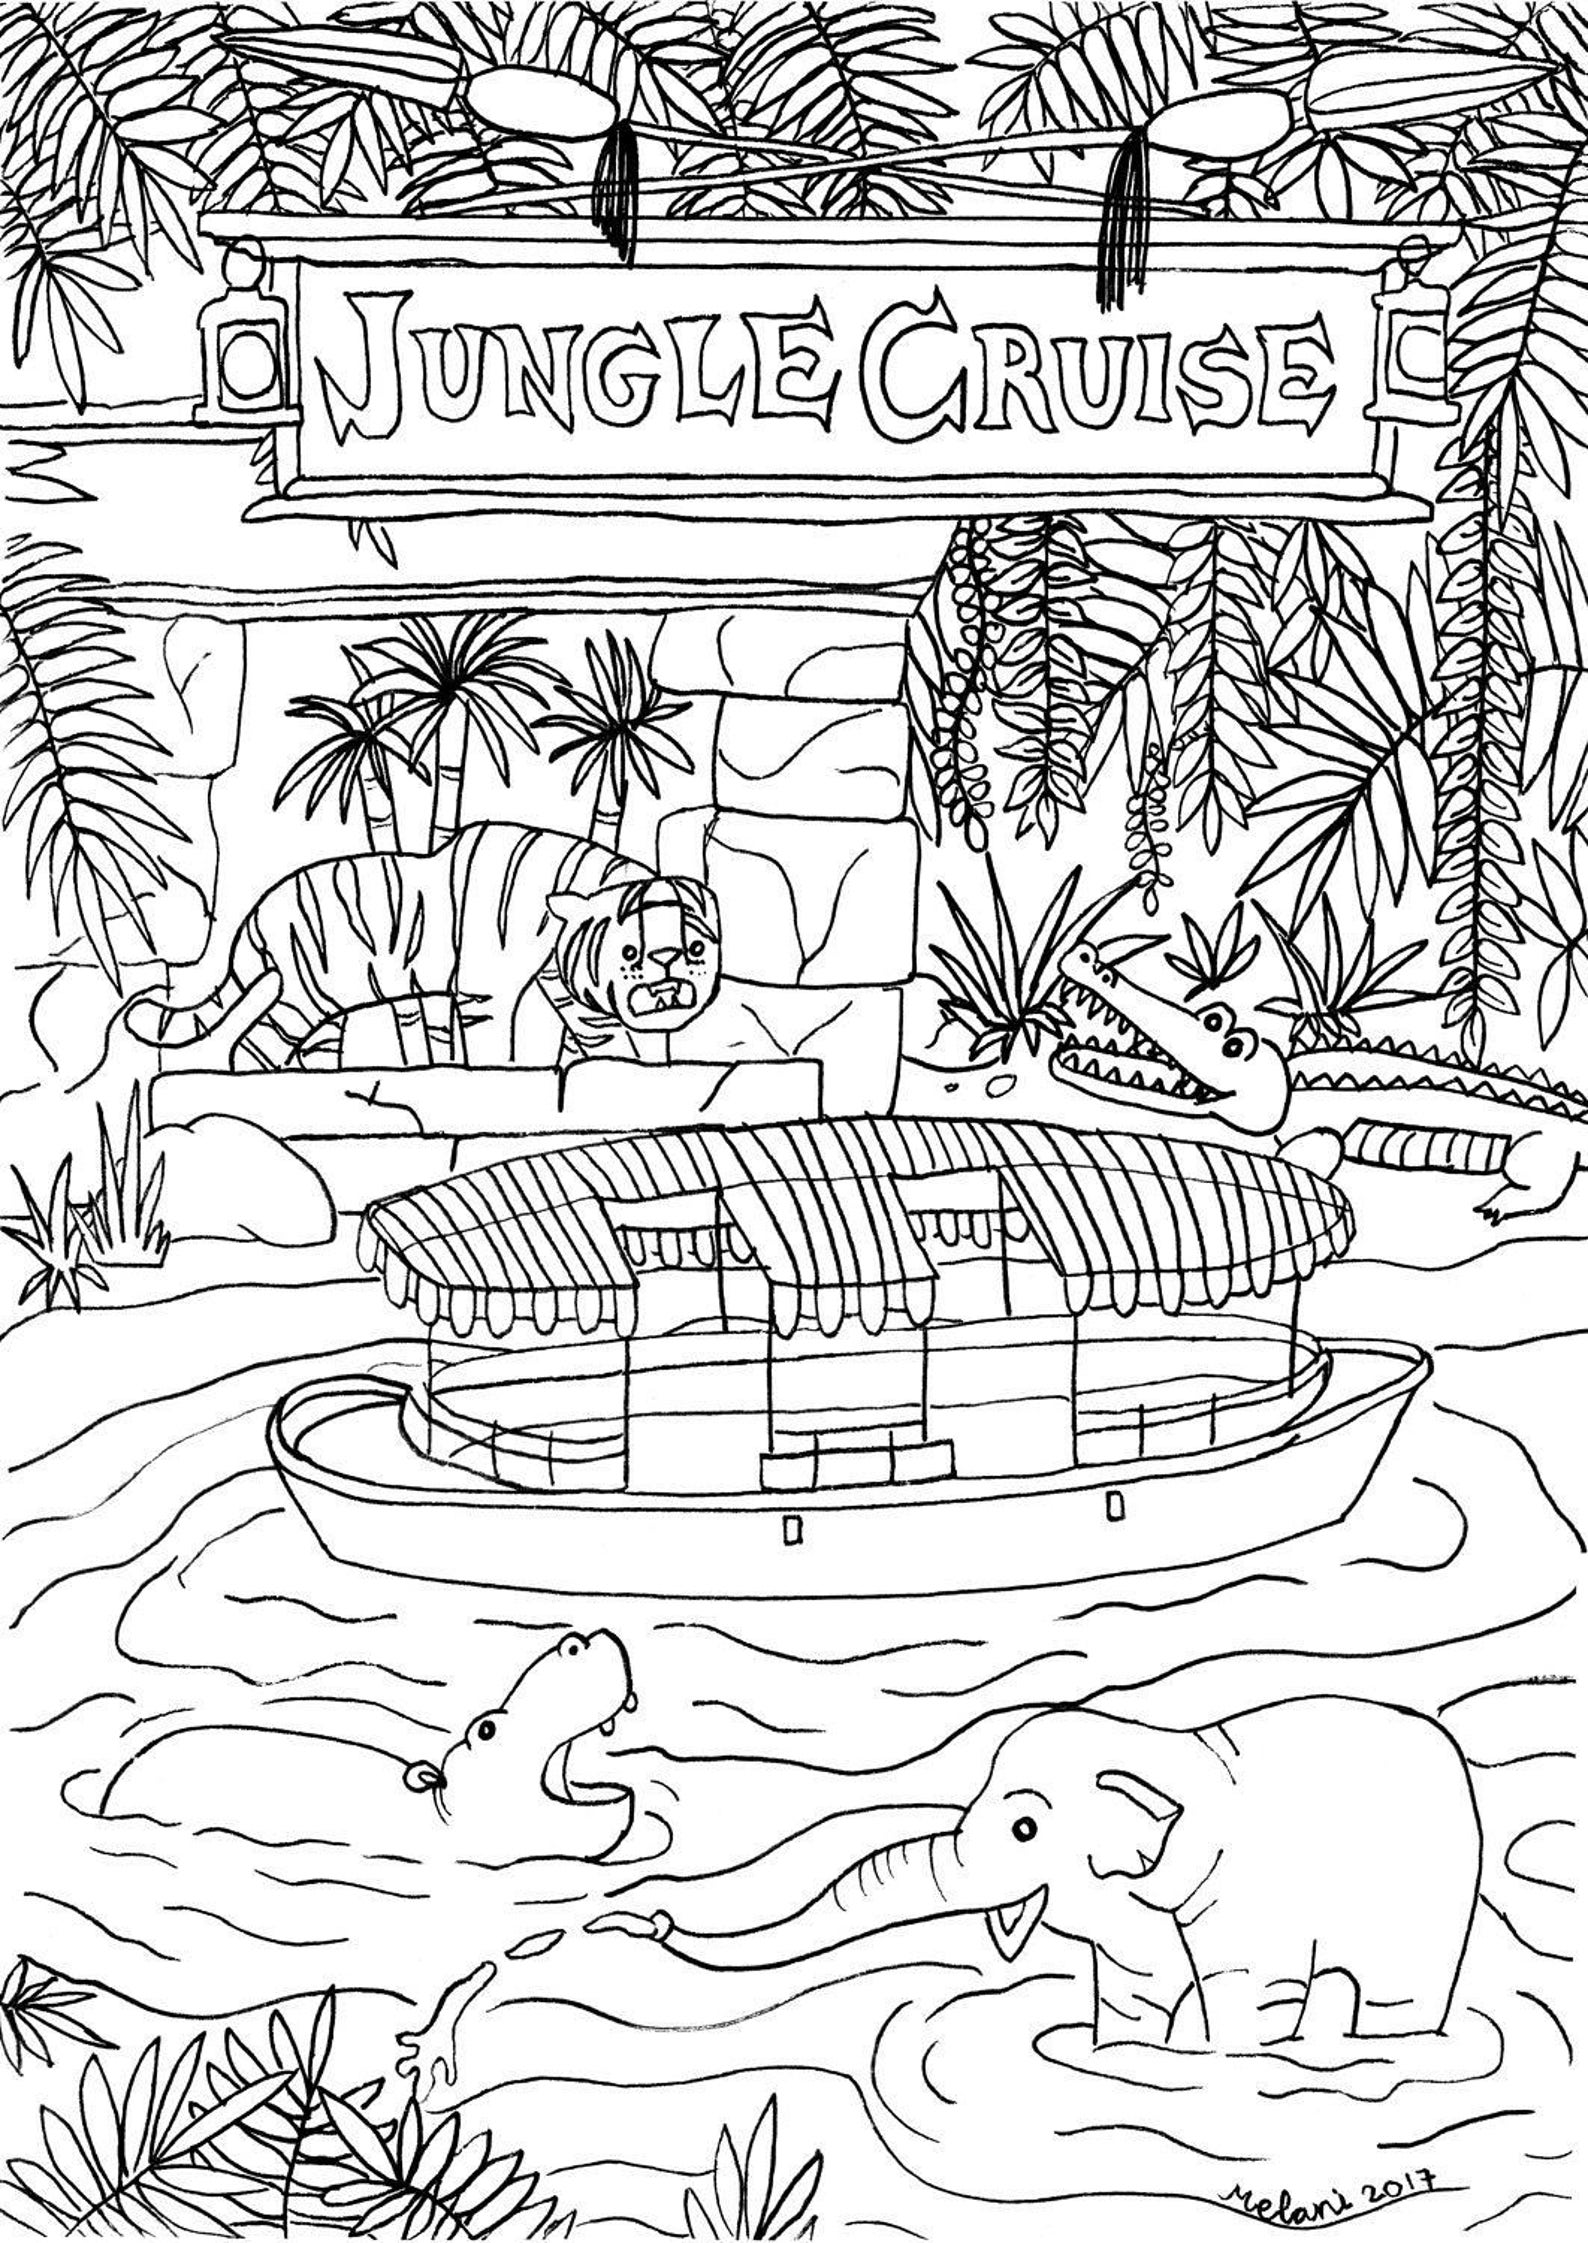 Disney Inspired Jungle Cruise Coloring Page Printable | Etsy